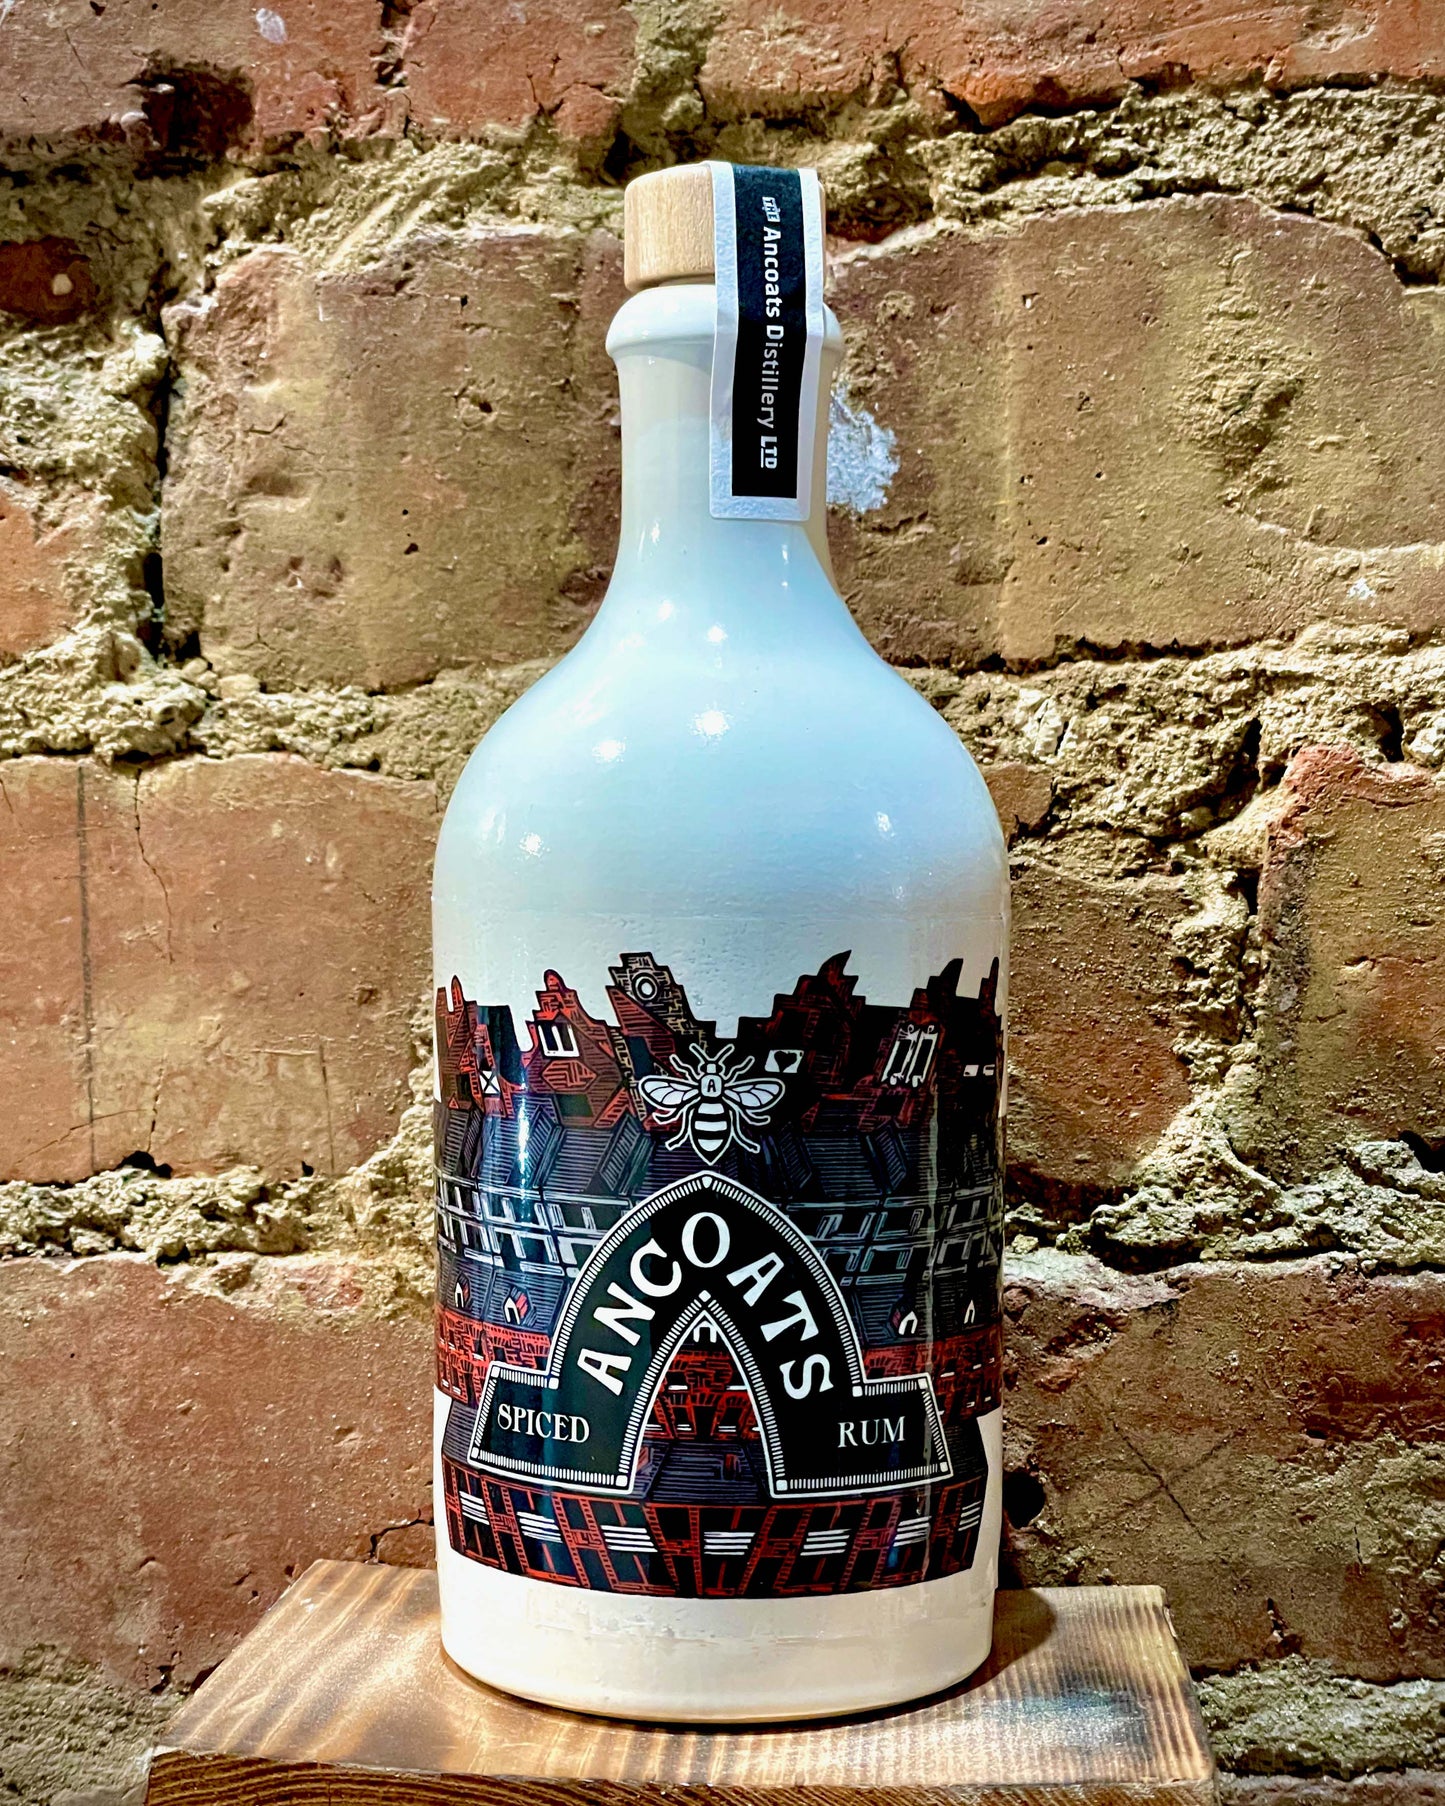 Ancoats Spiced Rum